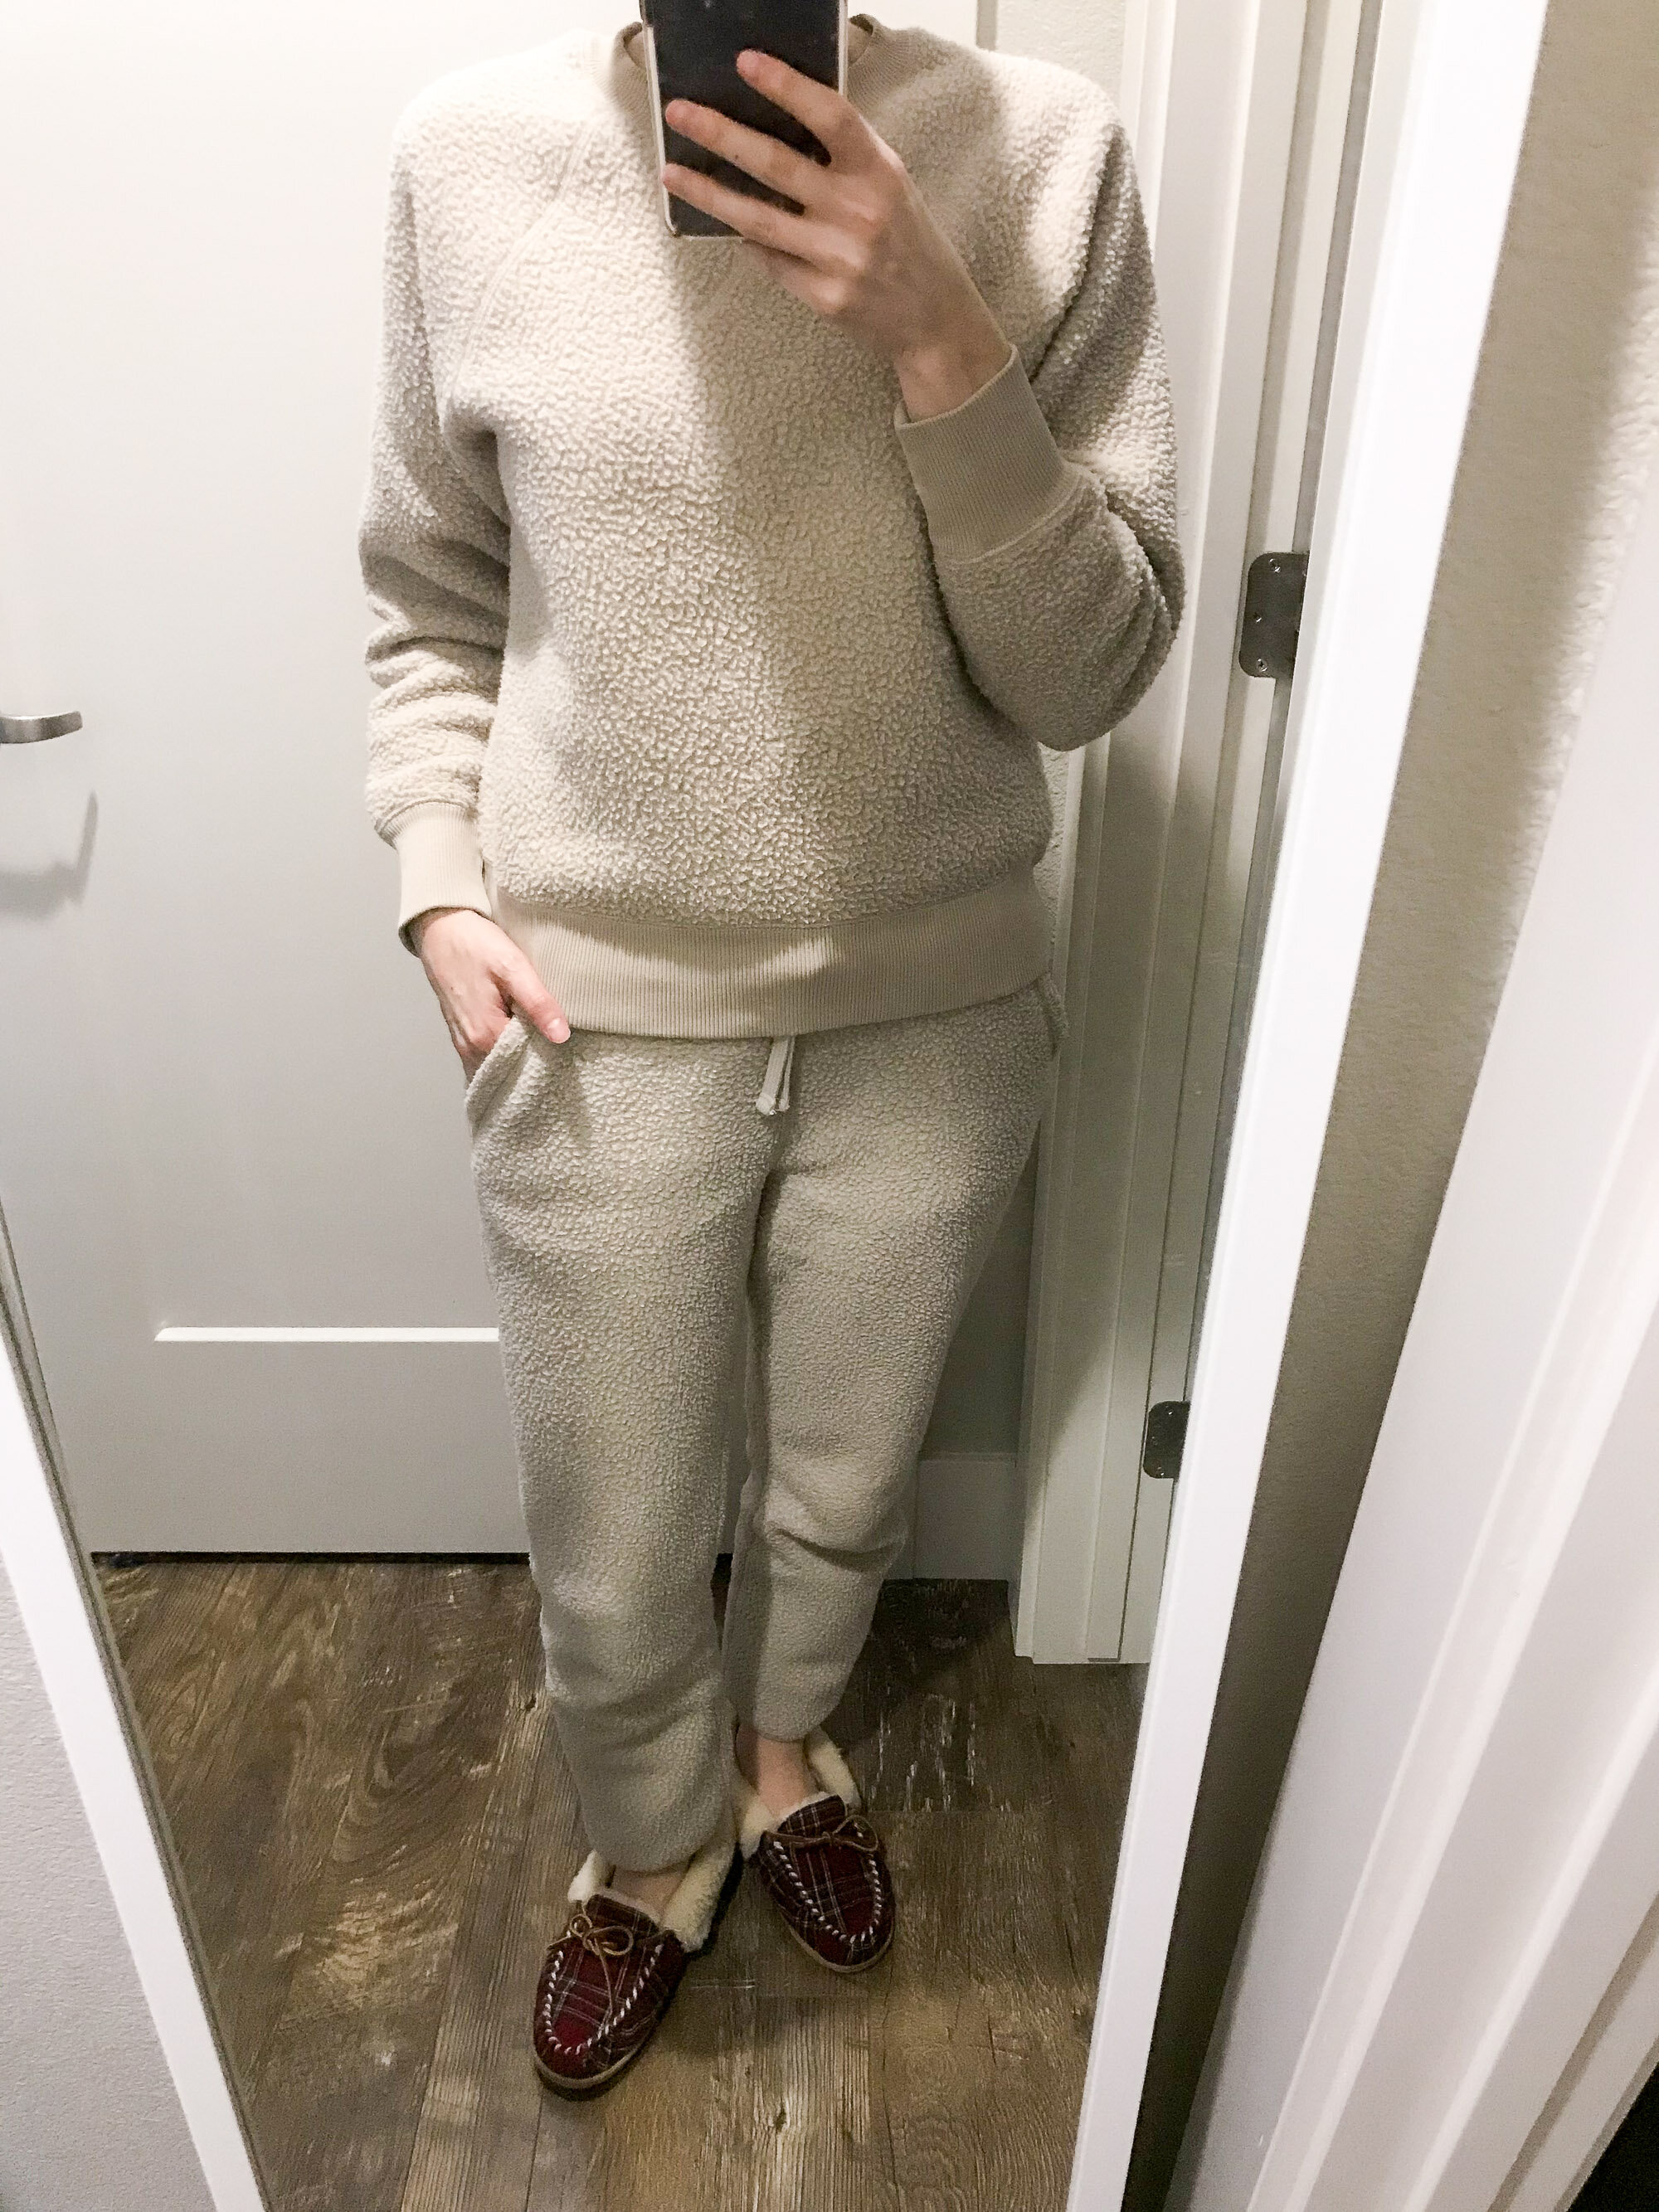 Work from home outfit: Everlane ReNew sweatshirt + sweatpants — Cotton Cashmere Cat Hair